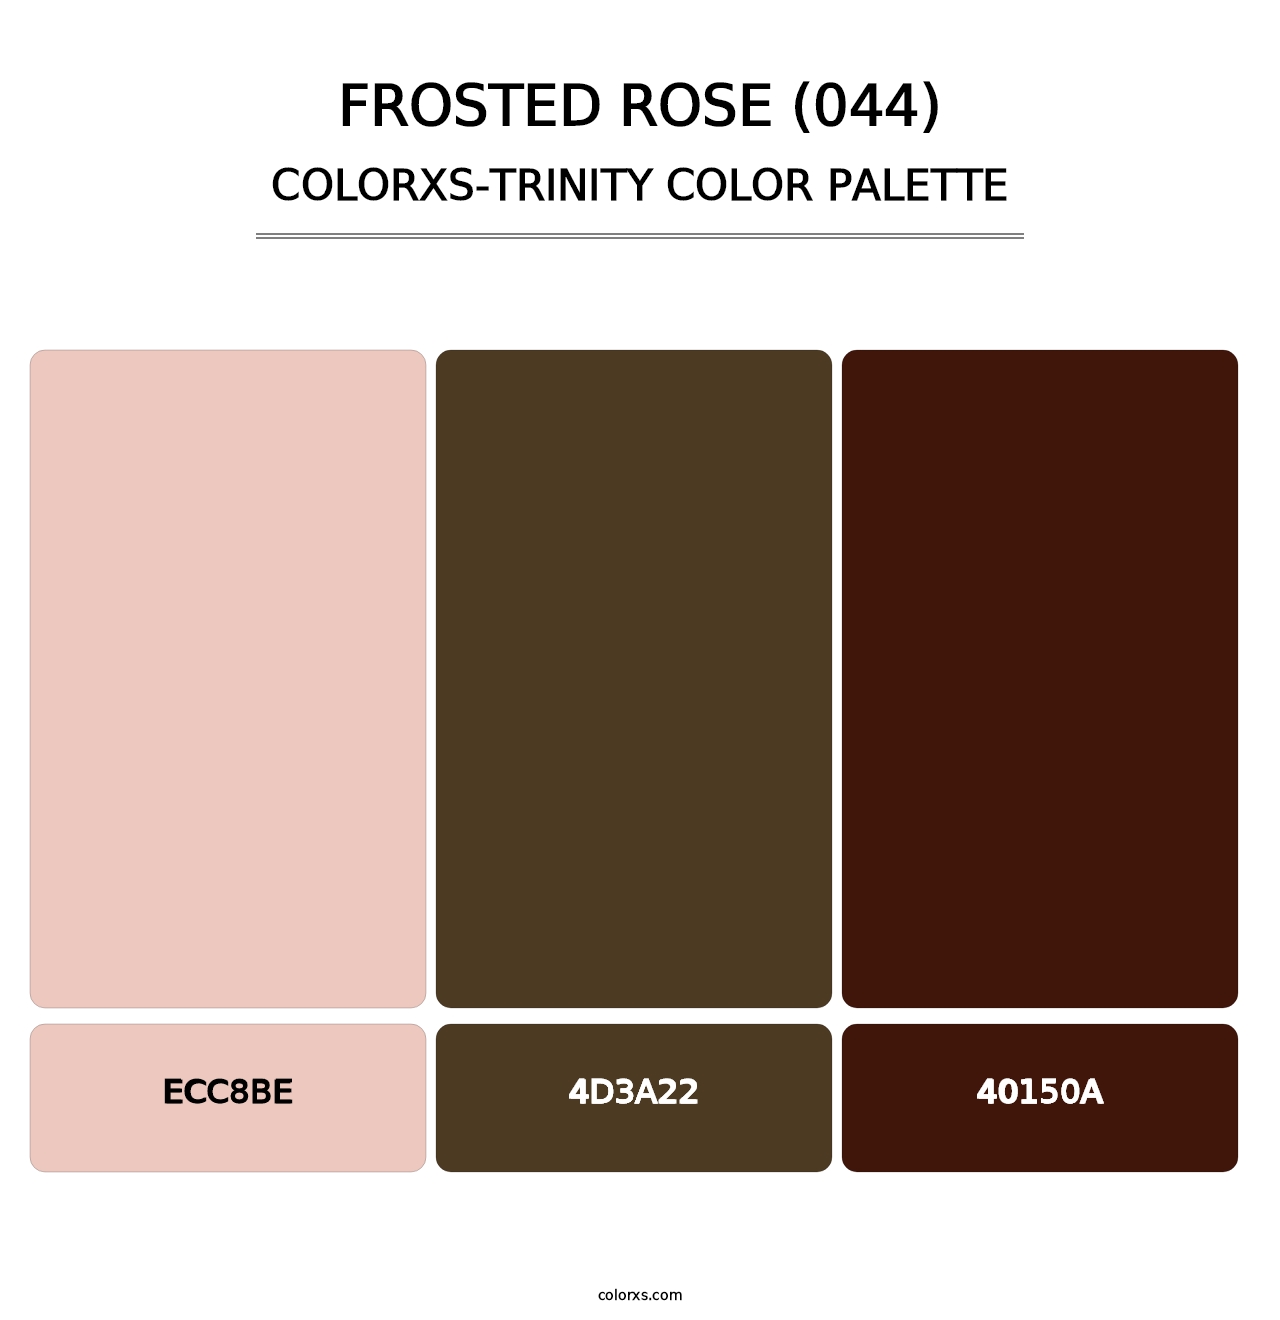 Frosted Rose (044) - Colorxs Trinity Palette